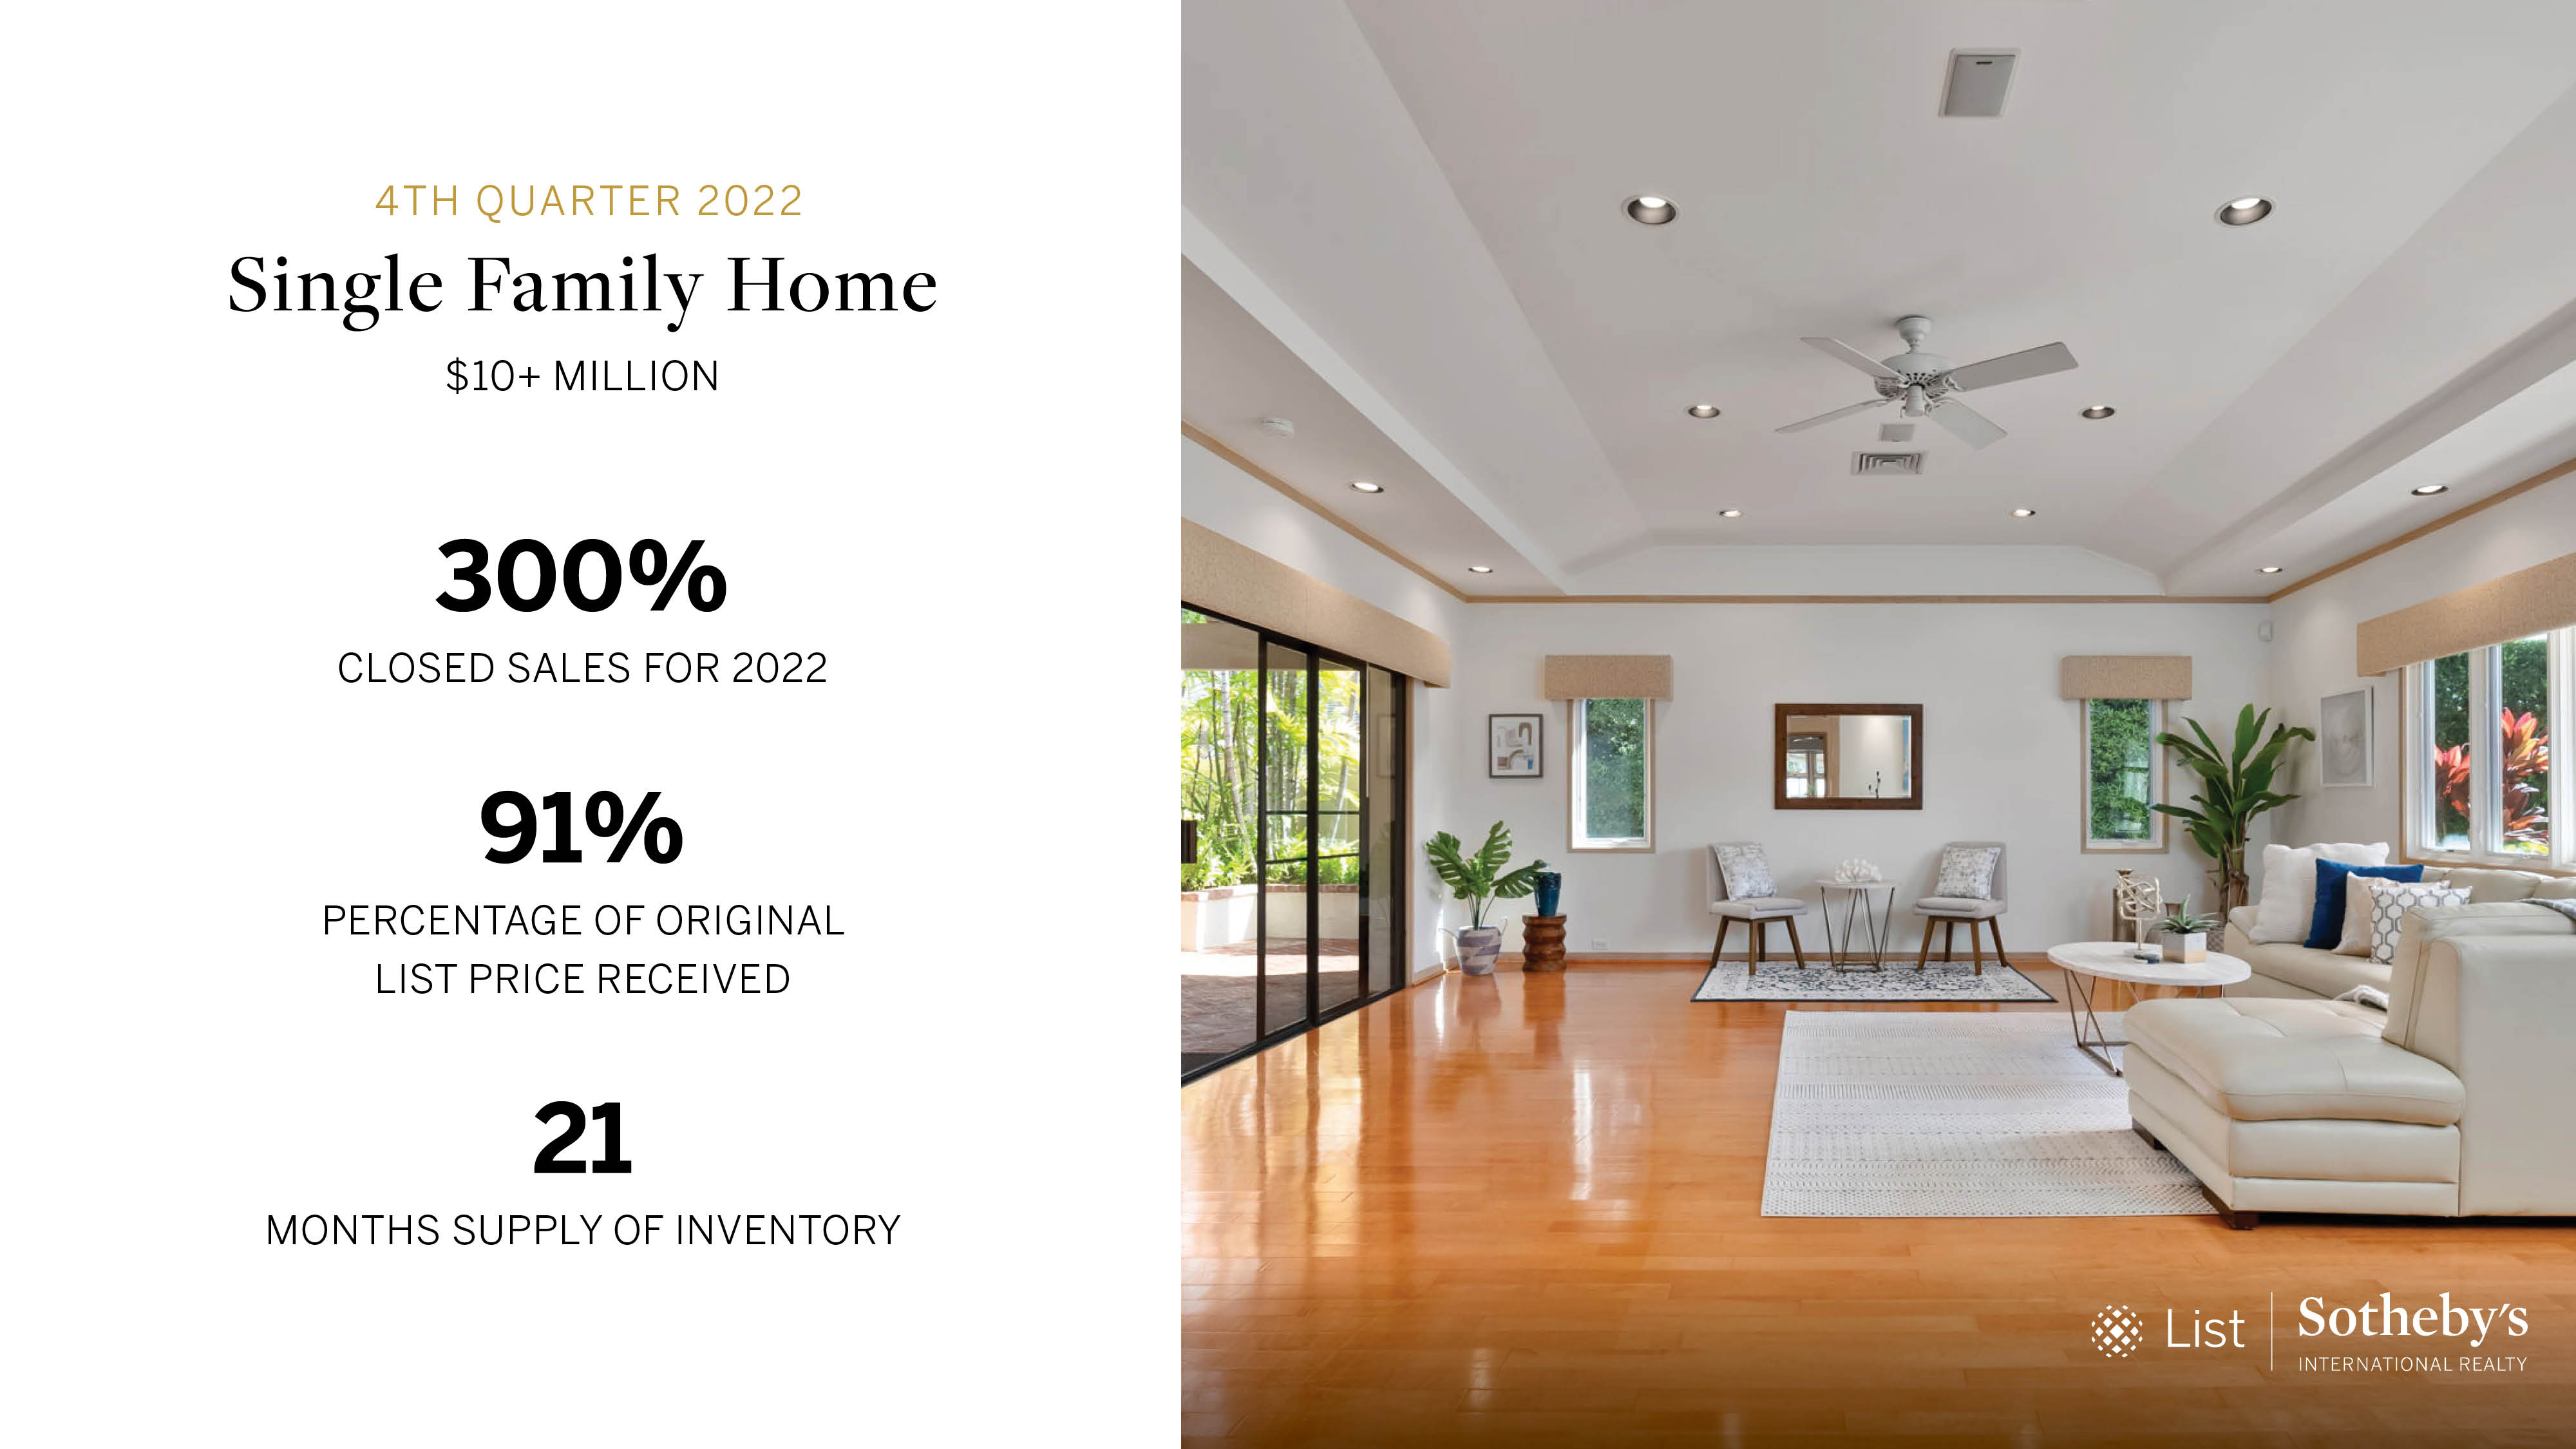 Q4 2022 Oahu Luxury Real Estate Market Report - Single Family Homes 2